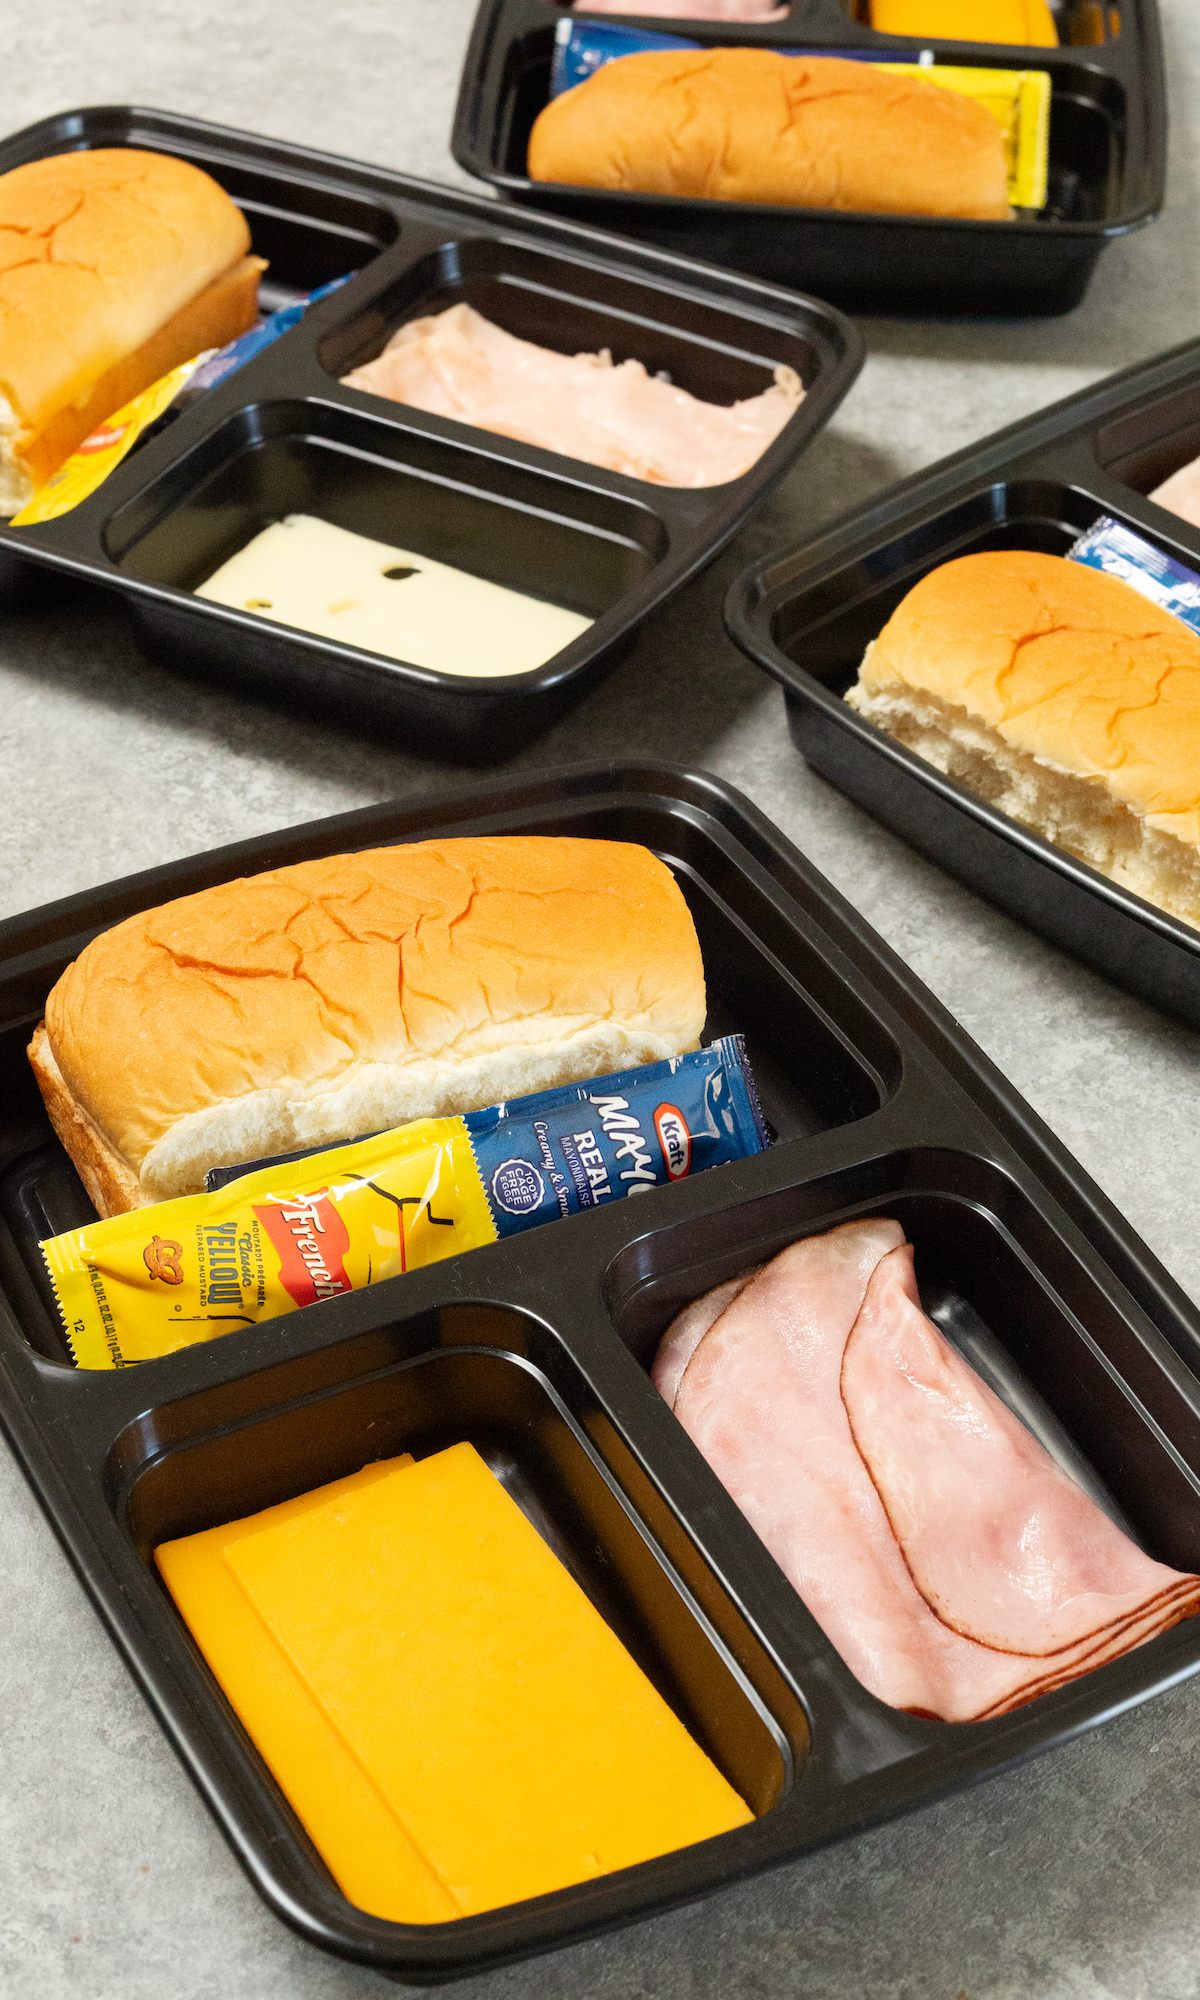 Four three compartment black plastic meal prep containers on a light background. Each individual compartment is filled with bread, sliced cheese, or sliced meat and condiment packets.